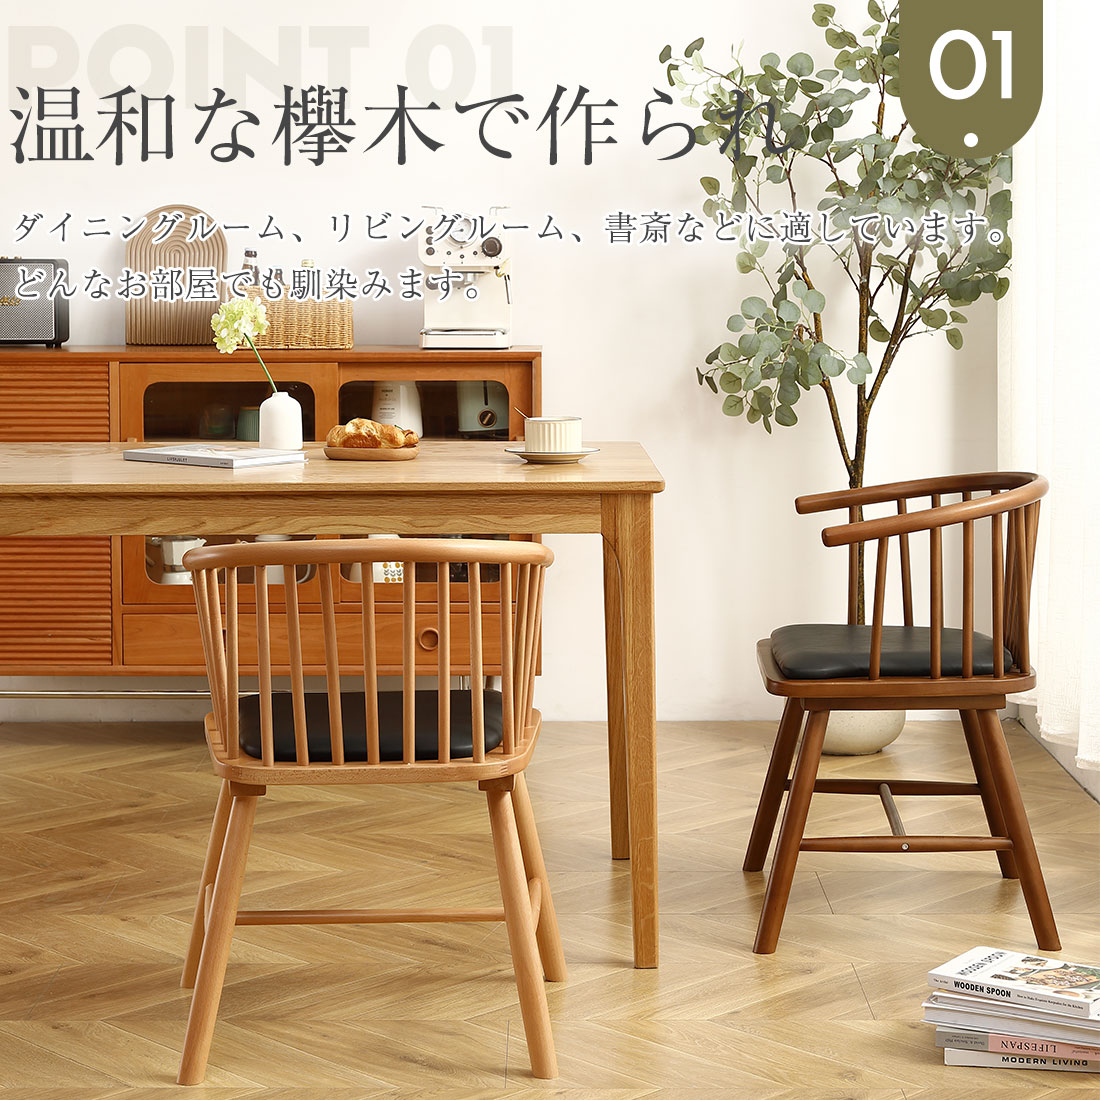 [ all goods 5%OFF* today limit ] limitation sale dining chair natural tree 1 legs wooden stylish .. sause PU bearing surface chair living retro modern popular Northern Europe natural laba